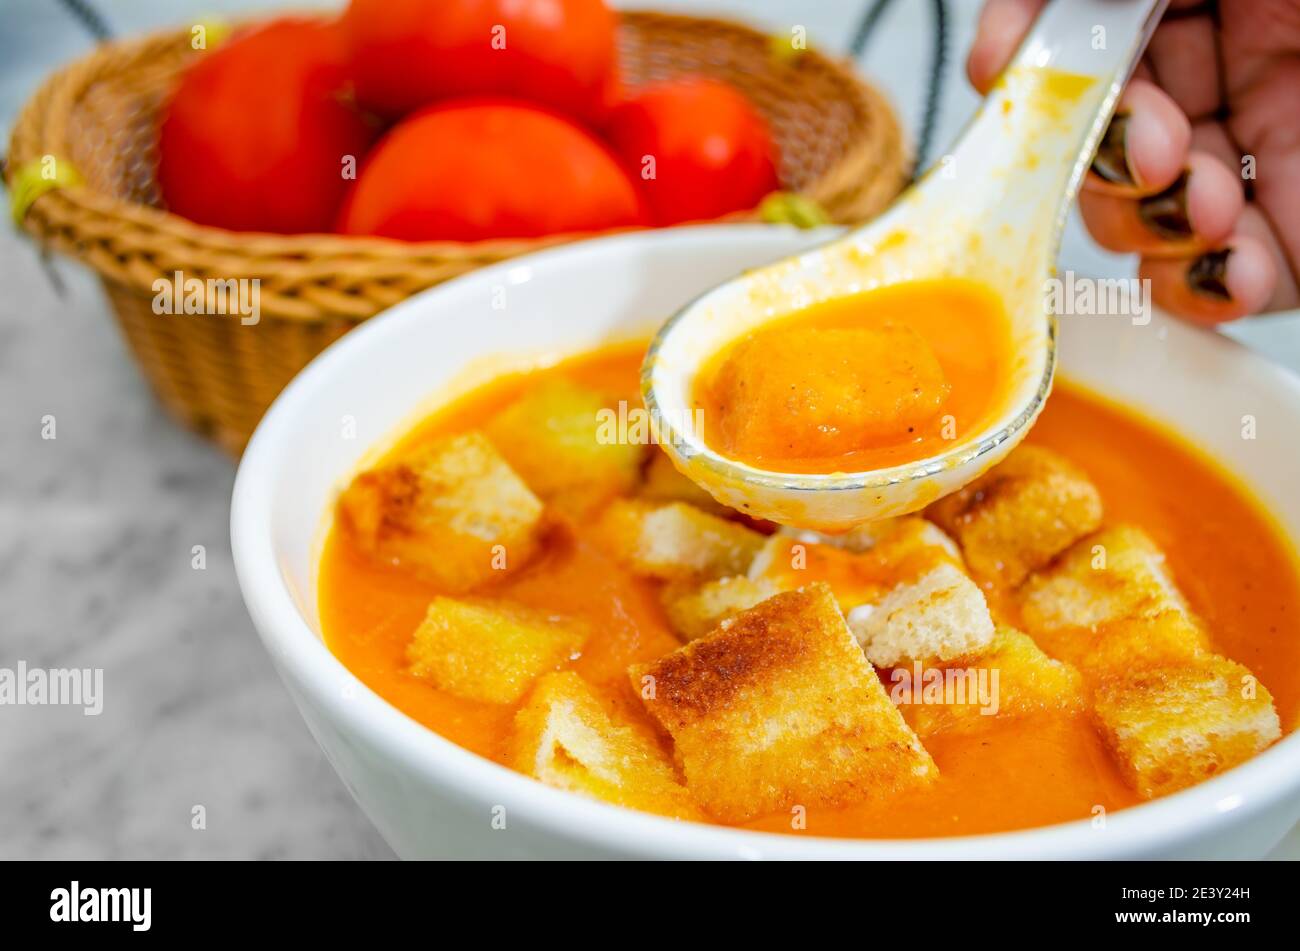 Closeup of human hand taking Tomato Soup with bread croutons in a soup spoon Stock Photo